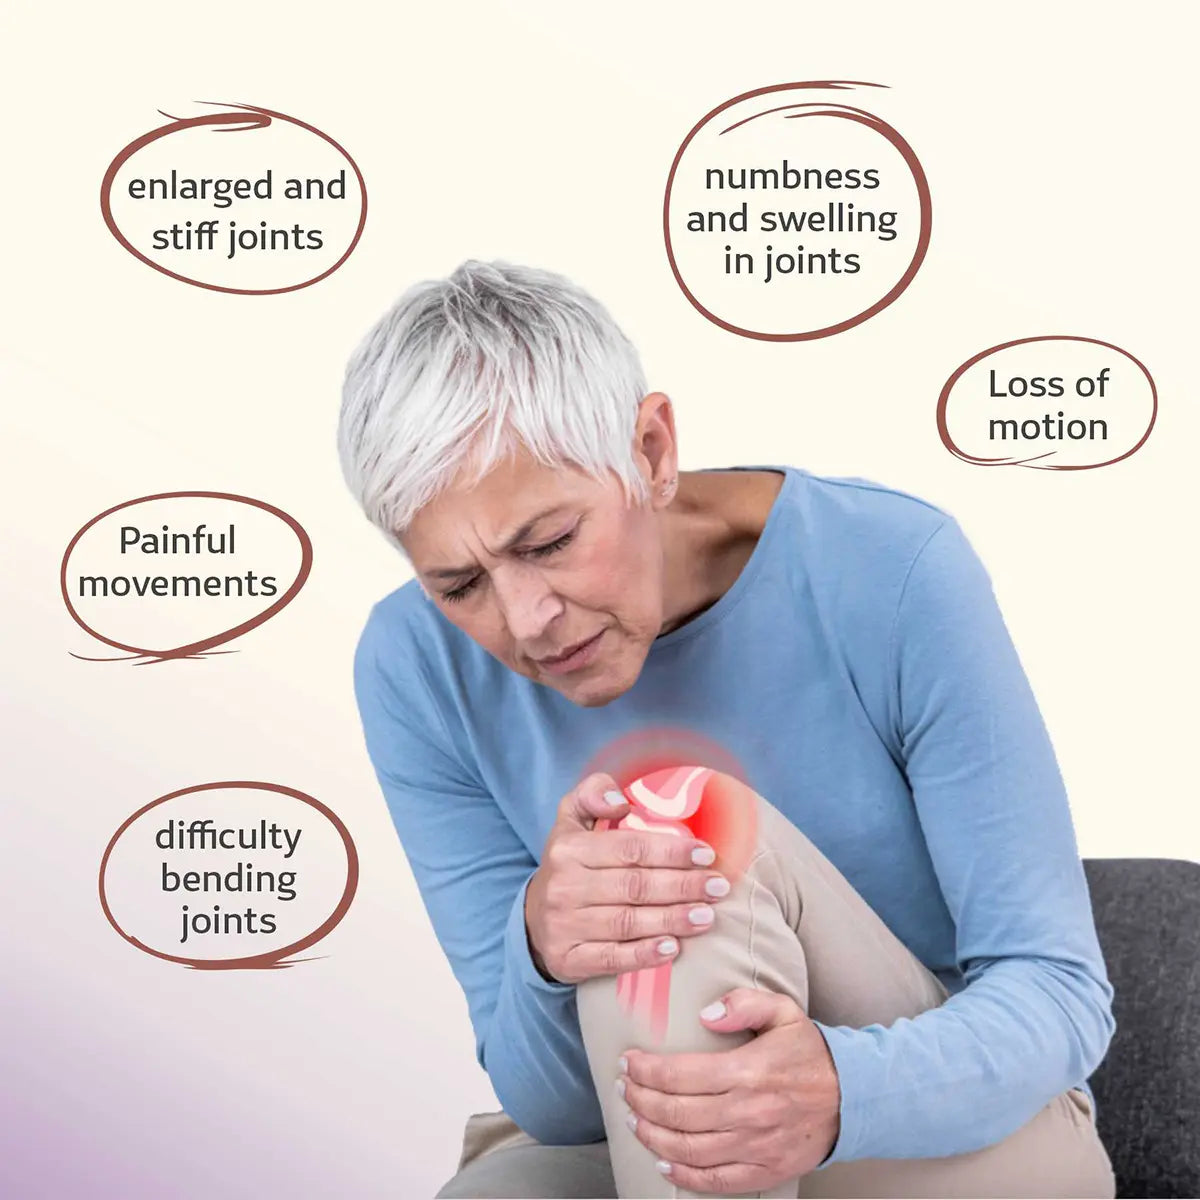 Swaarnim Joints Care | Complete relief from pain and tenderness of joints Improving bone health | Promotes movements